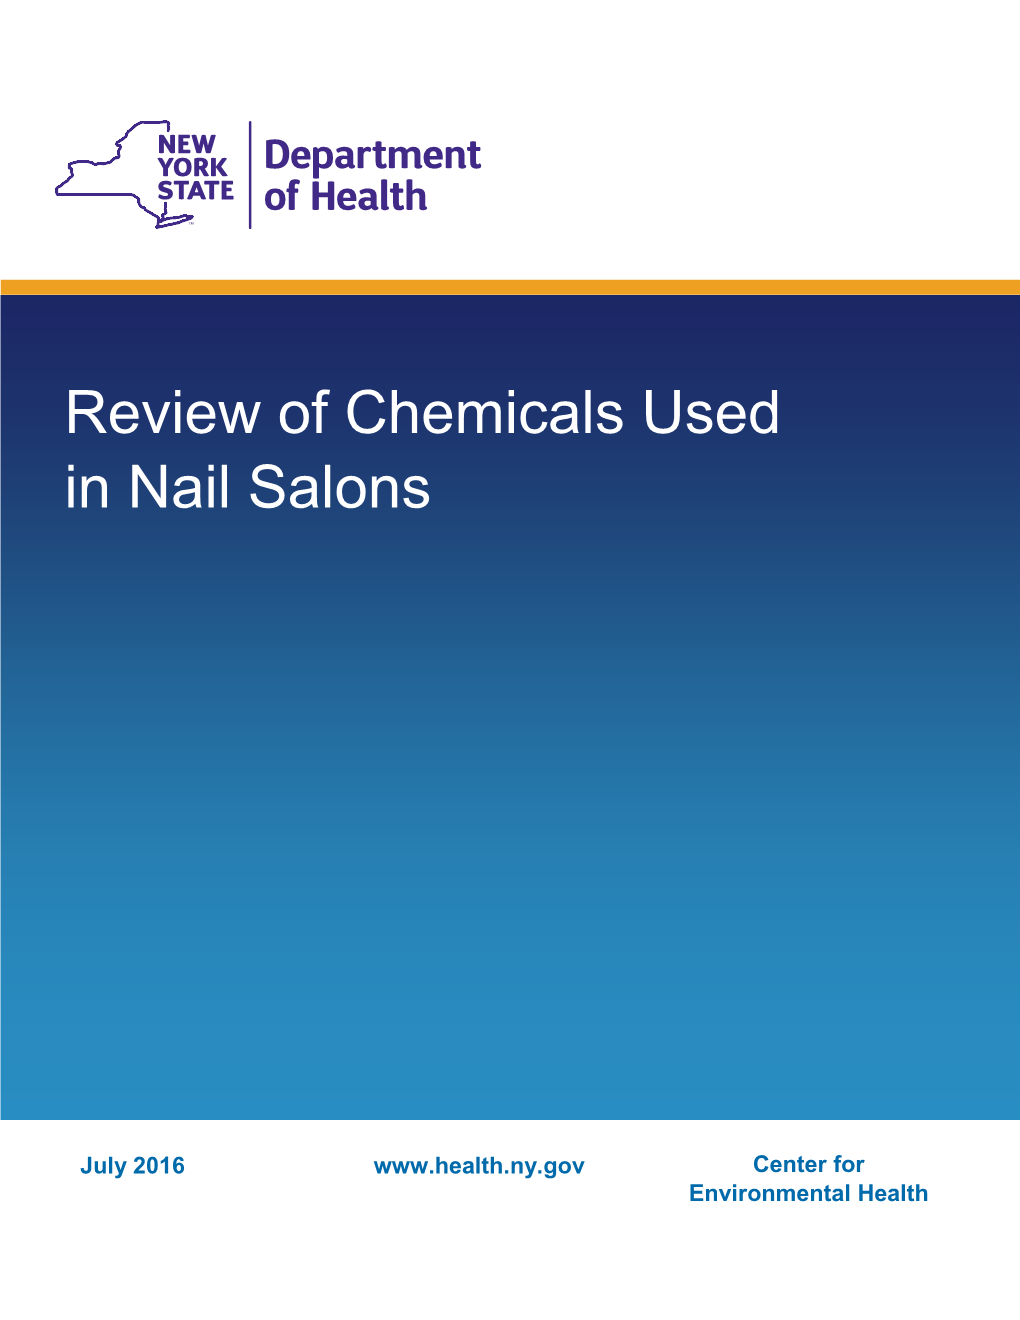 Review of Chemicals Used in Nail Salons